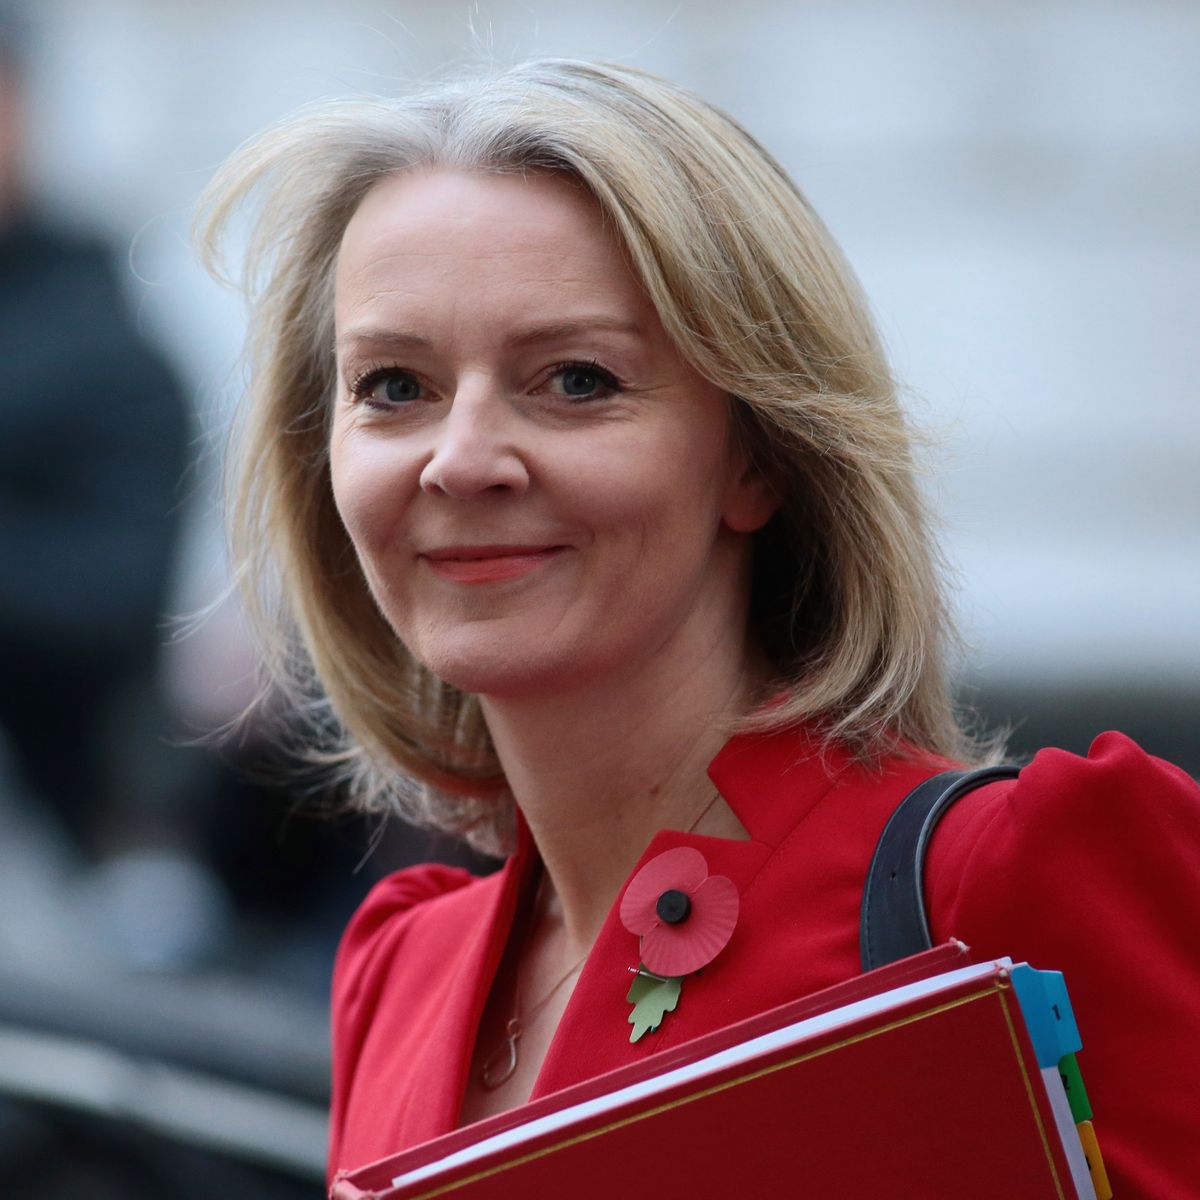 LONDON, ENGLAND - OCTOBER 29: Chief Secretary to the Treasury Elizabeth Truss arrives for a Cabinet meeting at 10 Downing Street on October 29, 2018 in London, England. The Chancellor of the Exchequer, Philip Hammond, will deliver a budget speech later today to Parliament, the last before the official Brexit date next year of March 29, 2019. (Photo by Jack Taylor/Getty Images)